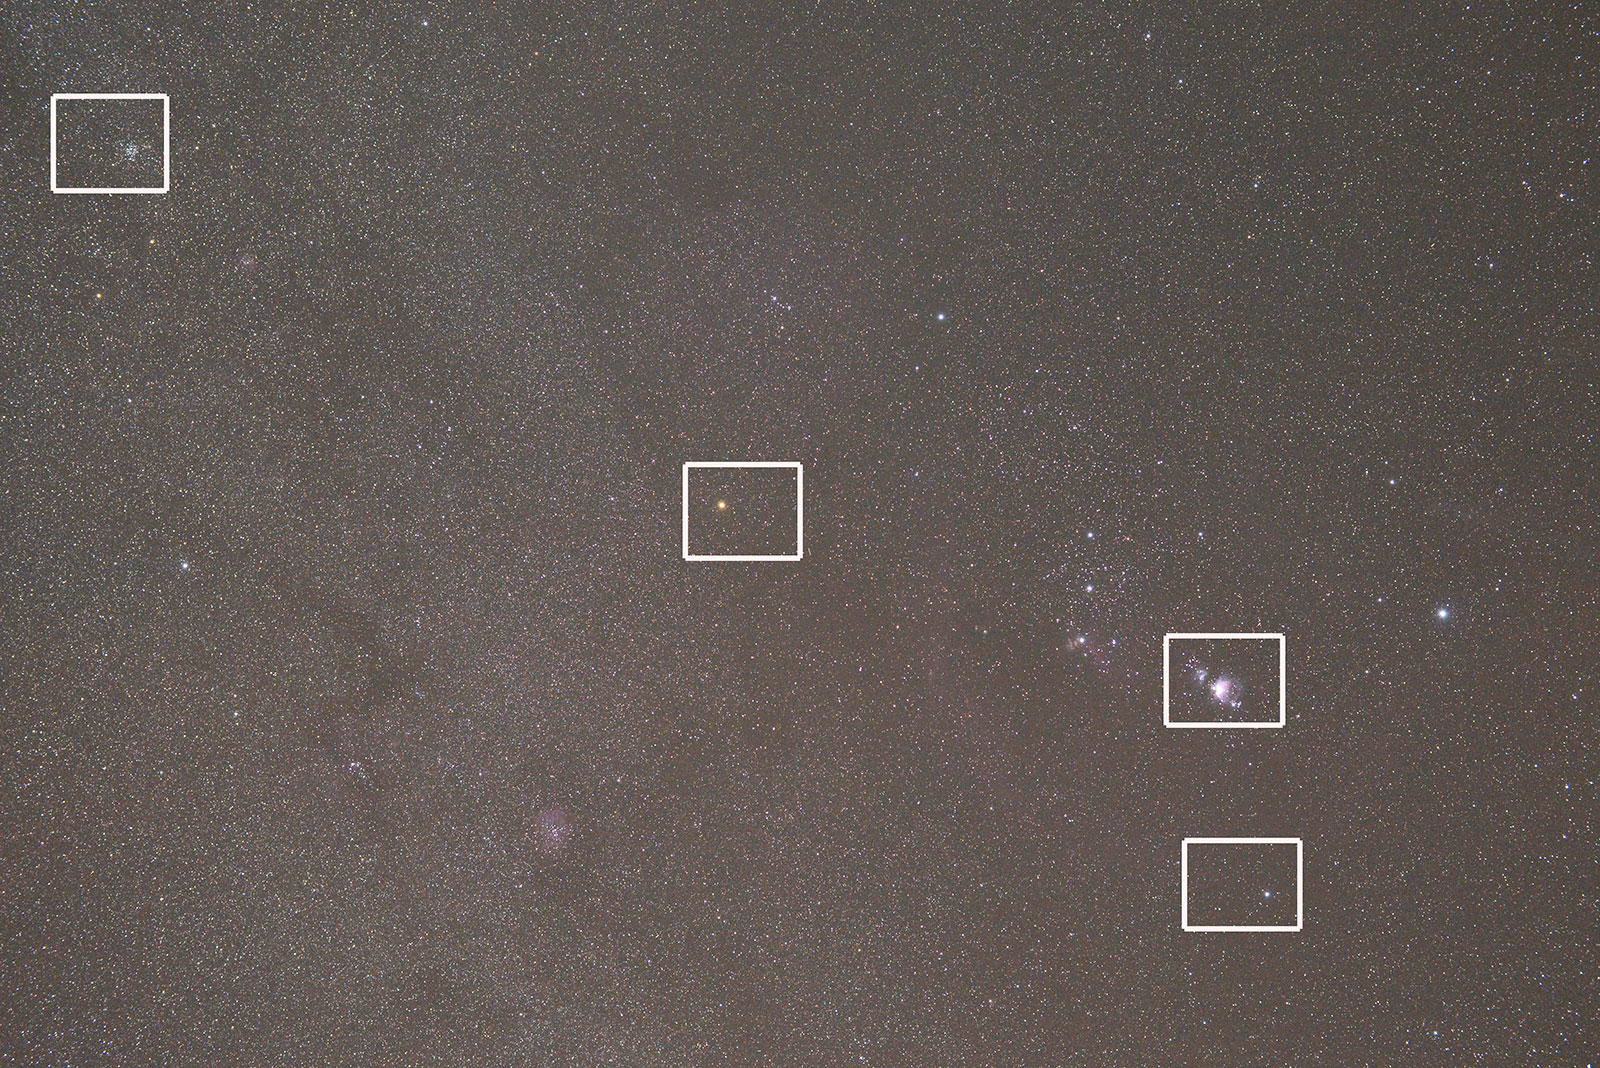 Table below shows 100% crops of different apertures at the center, far left corner, right corner and Orion nebula at right part of the images.